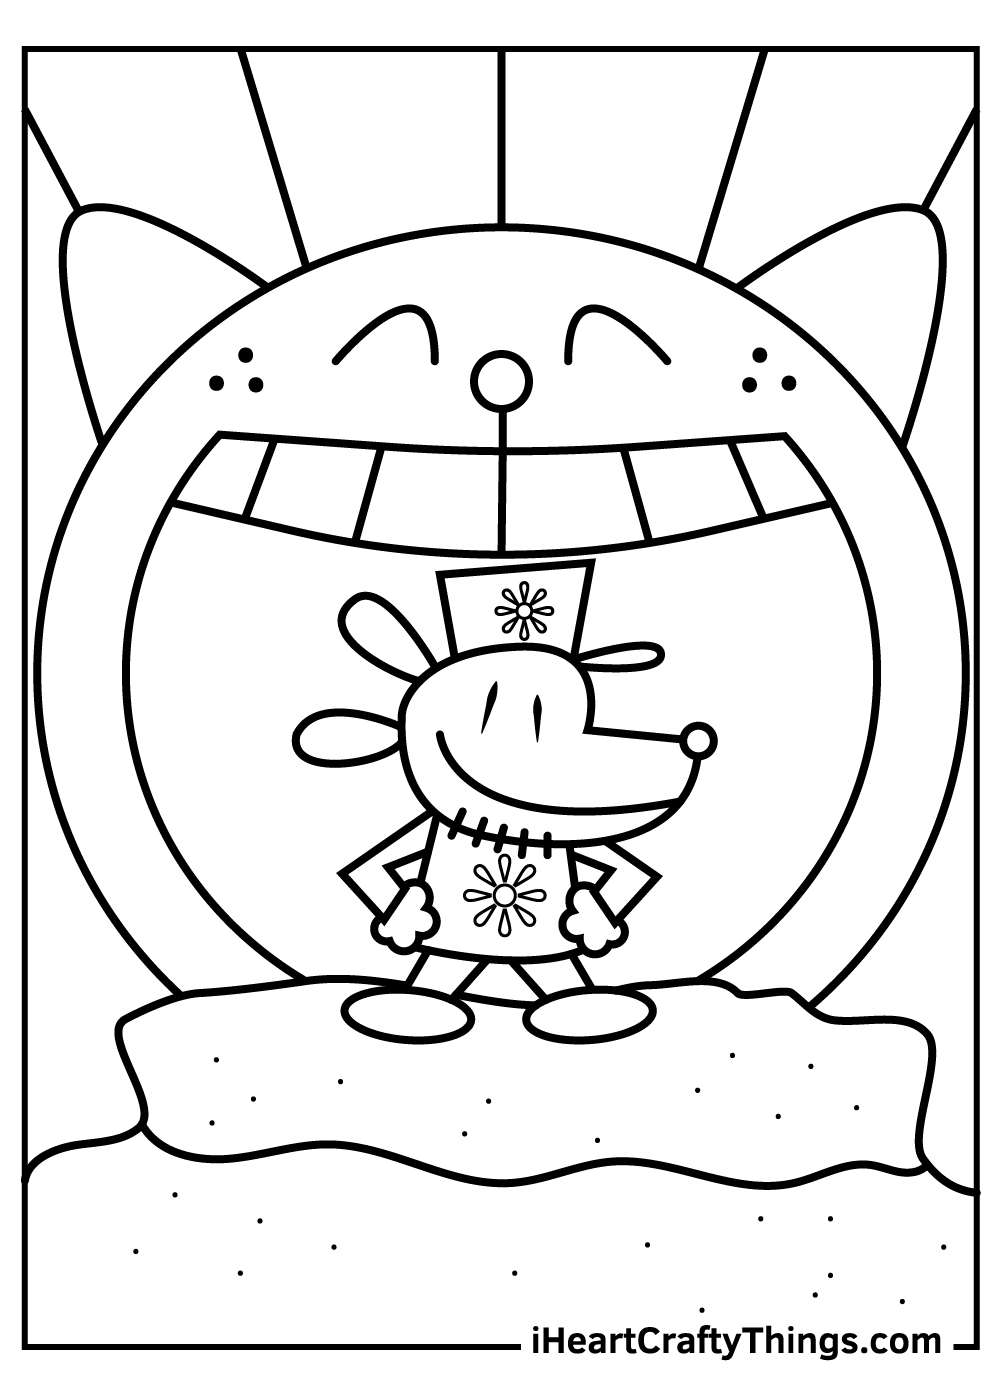 Dog man coloring pages free printables